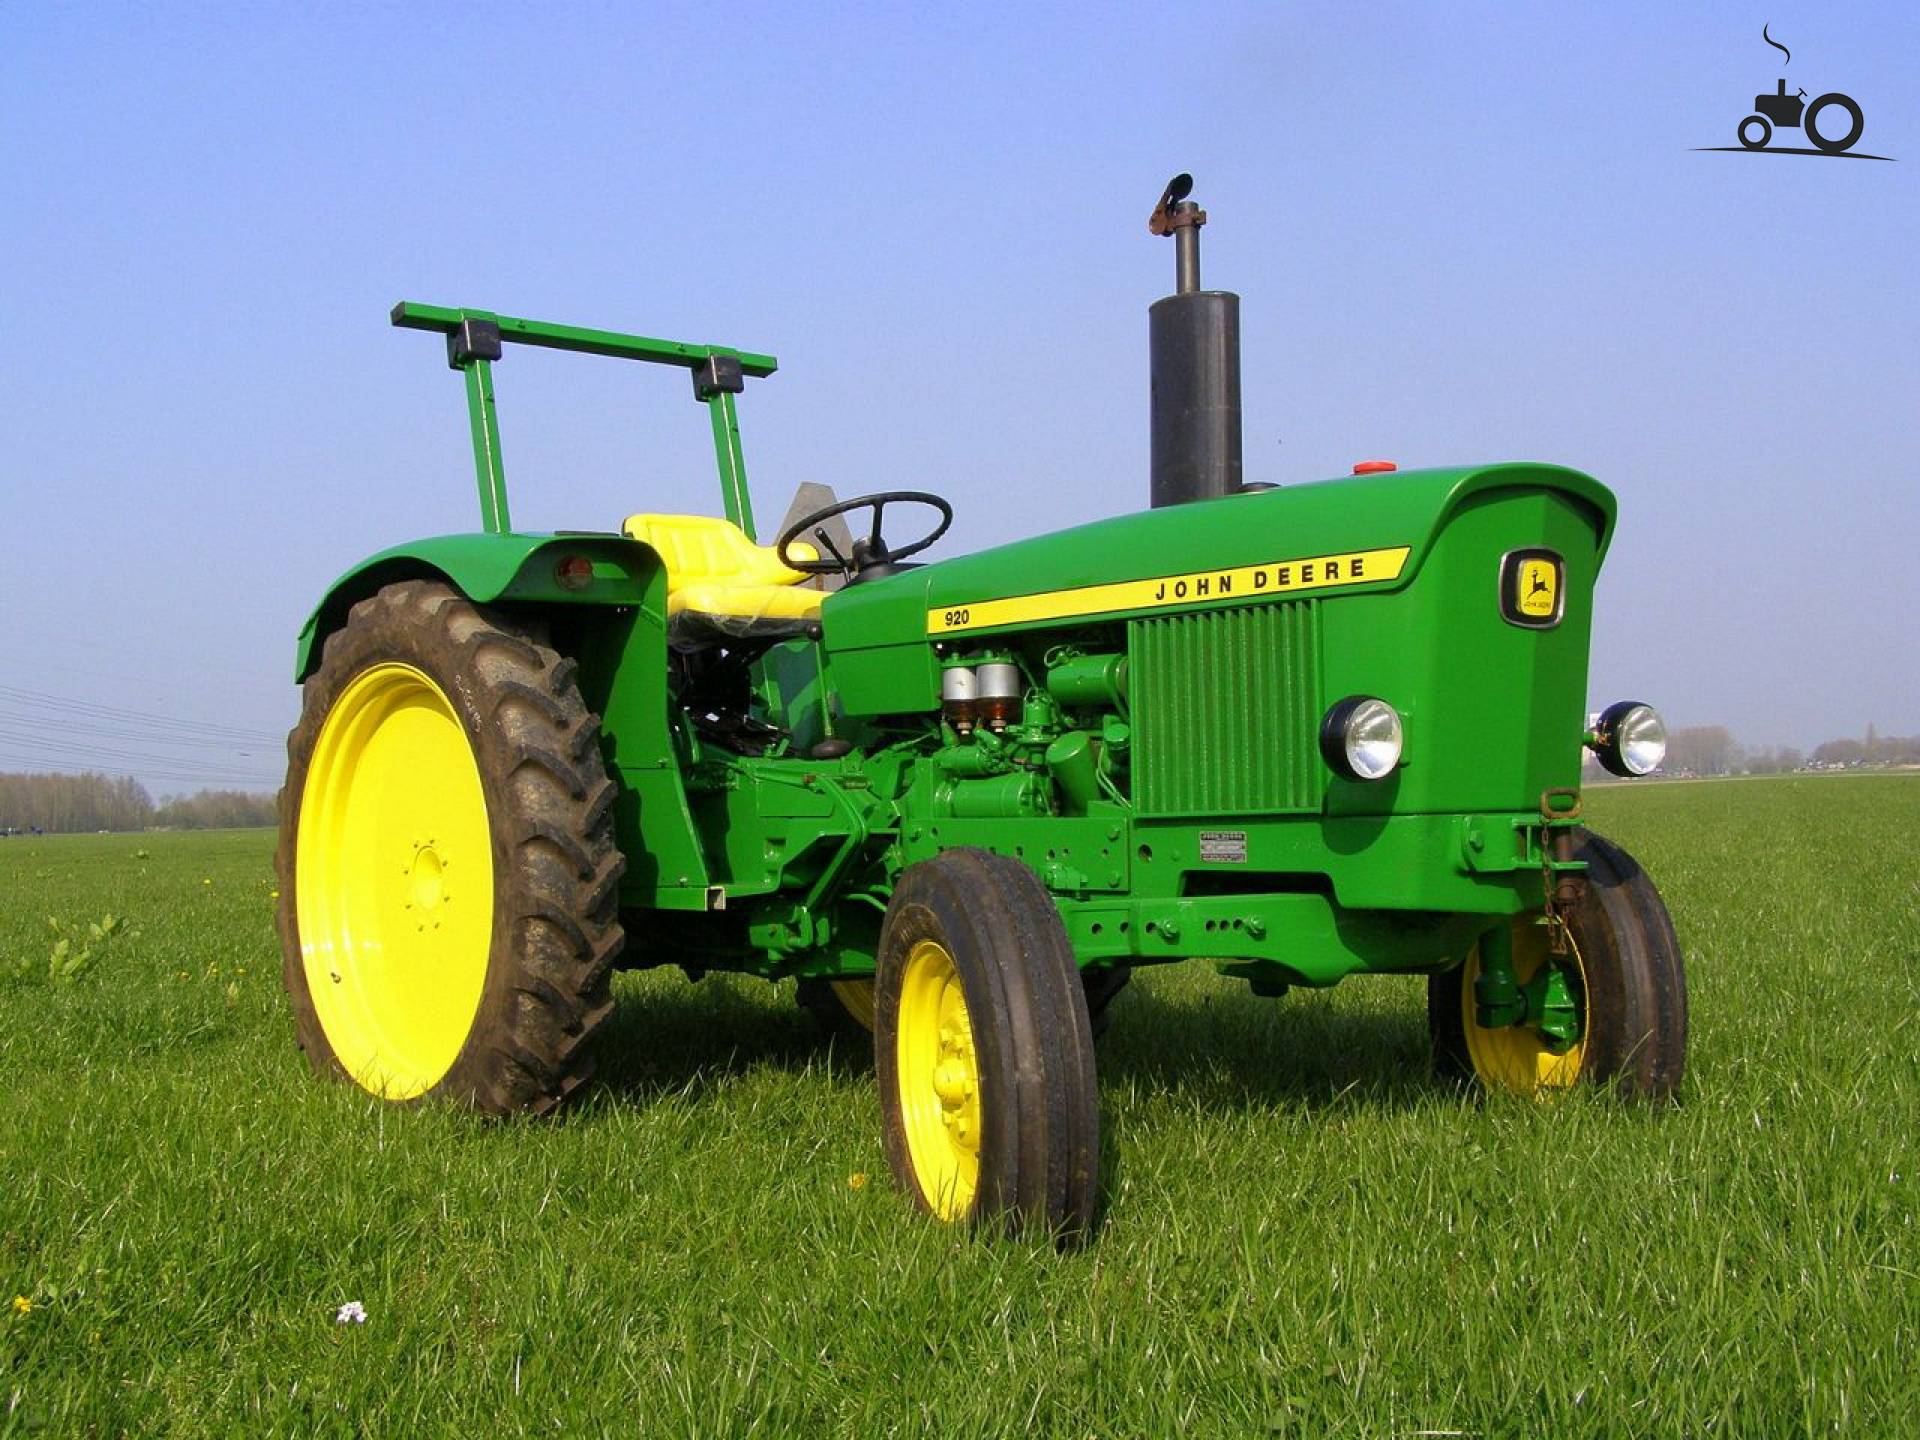 John Deere 920 Specs and data - Everything about the John Deere 920